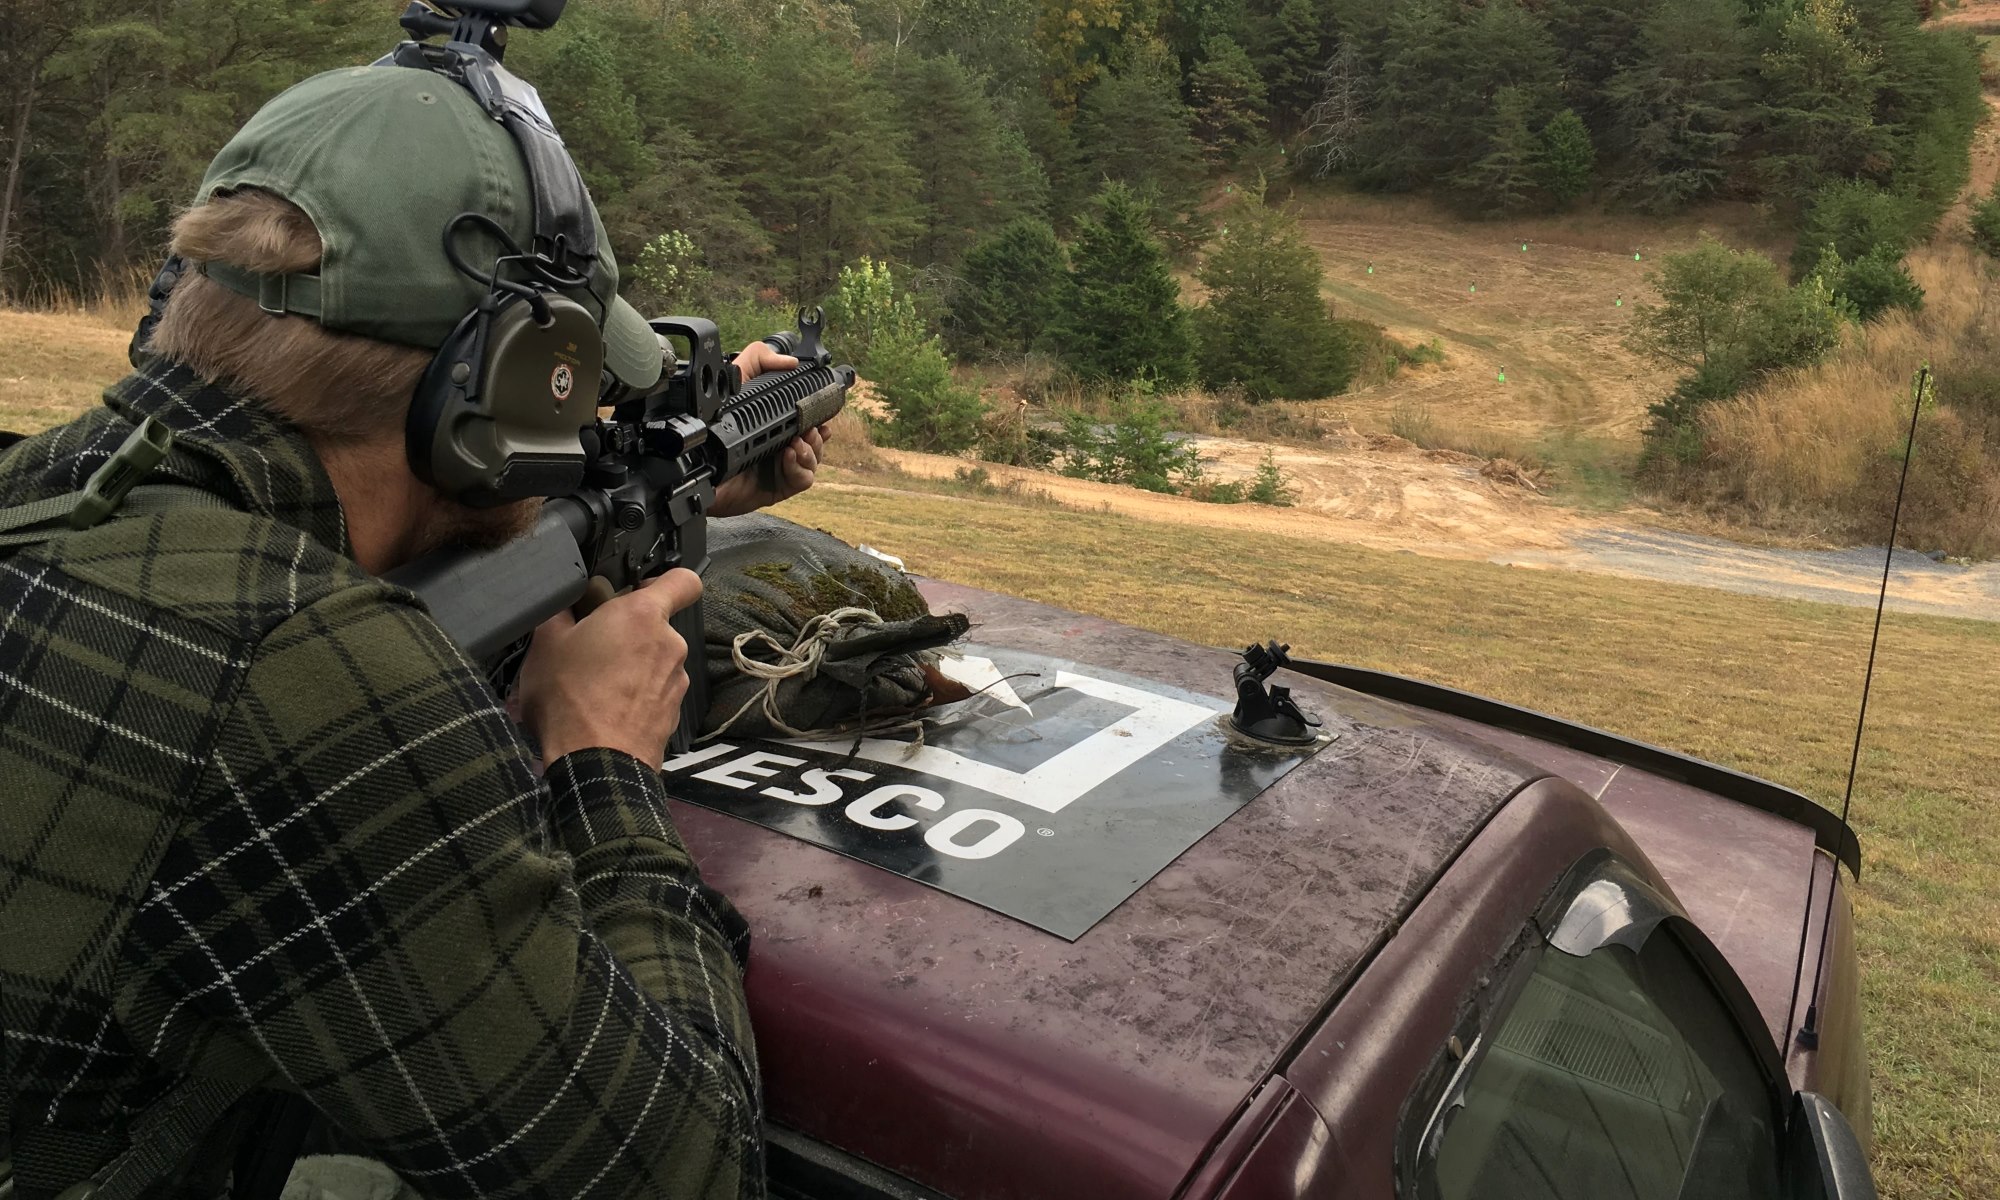 Man on a car on a hill shooting at green targets down below.